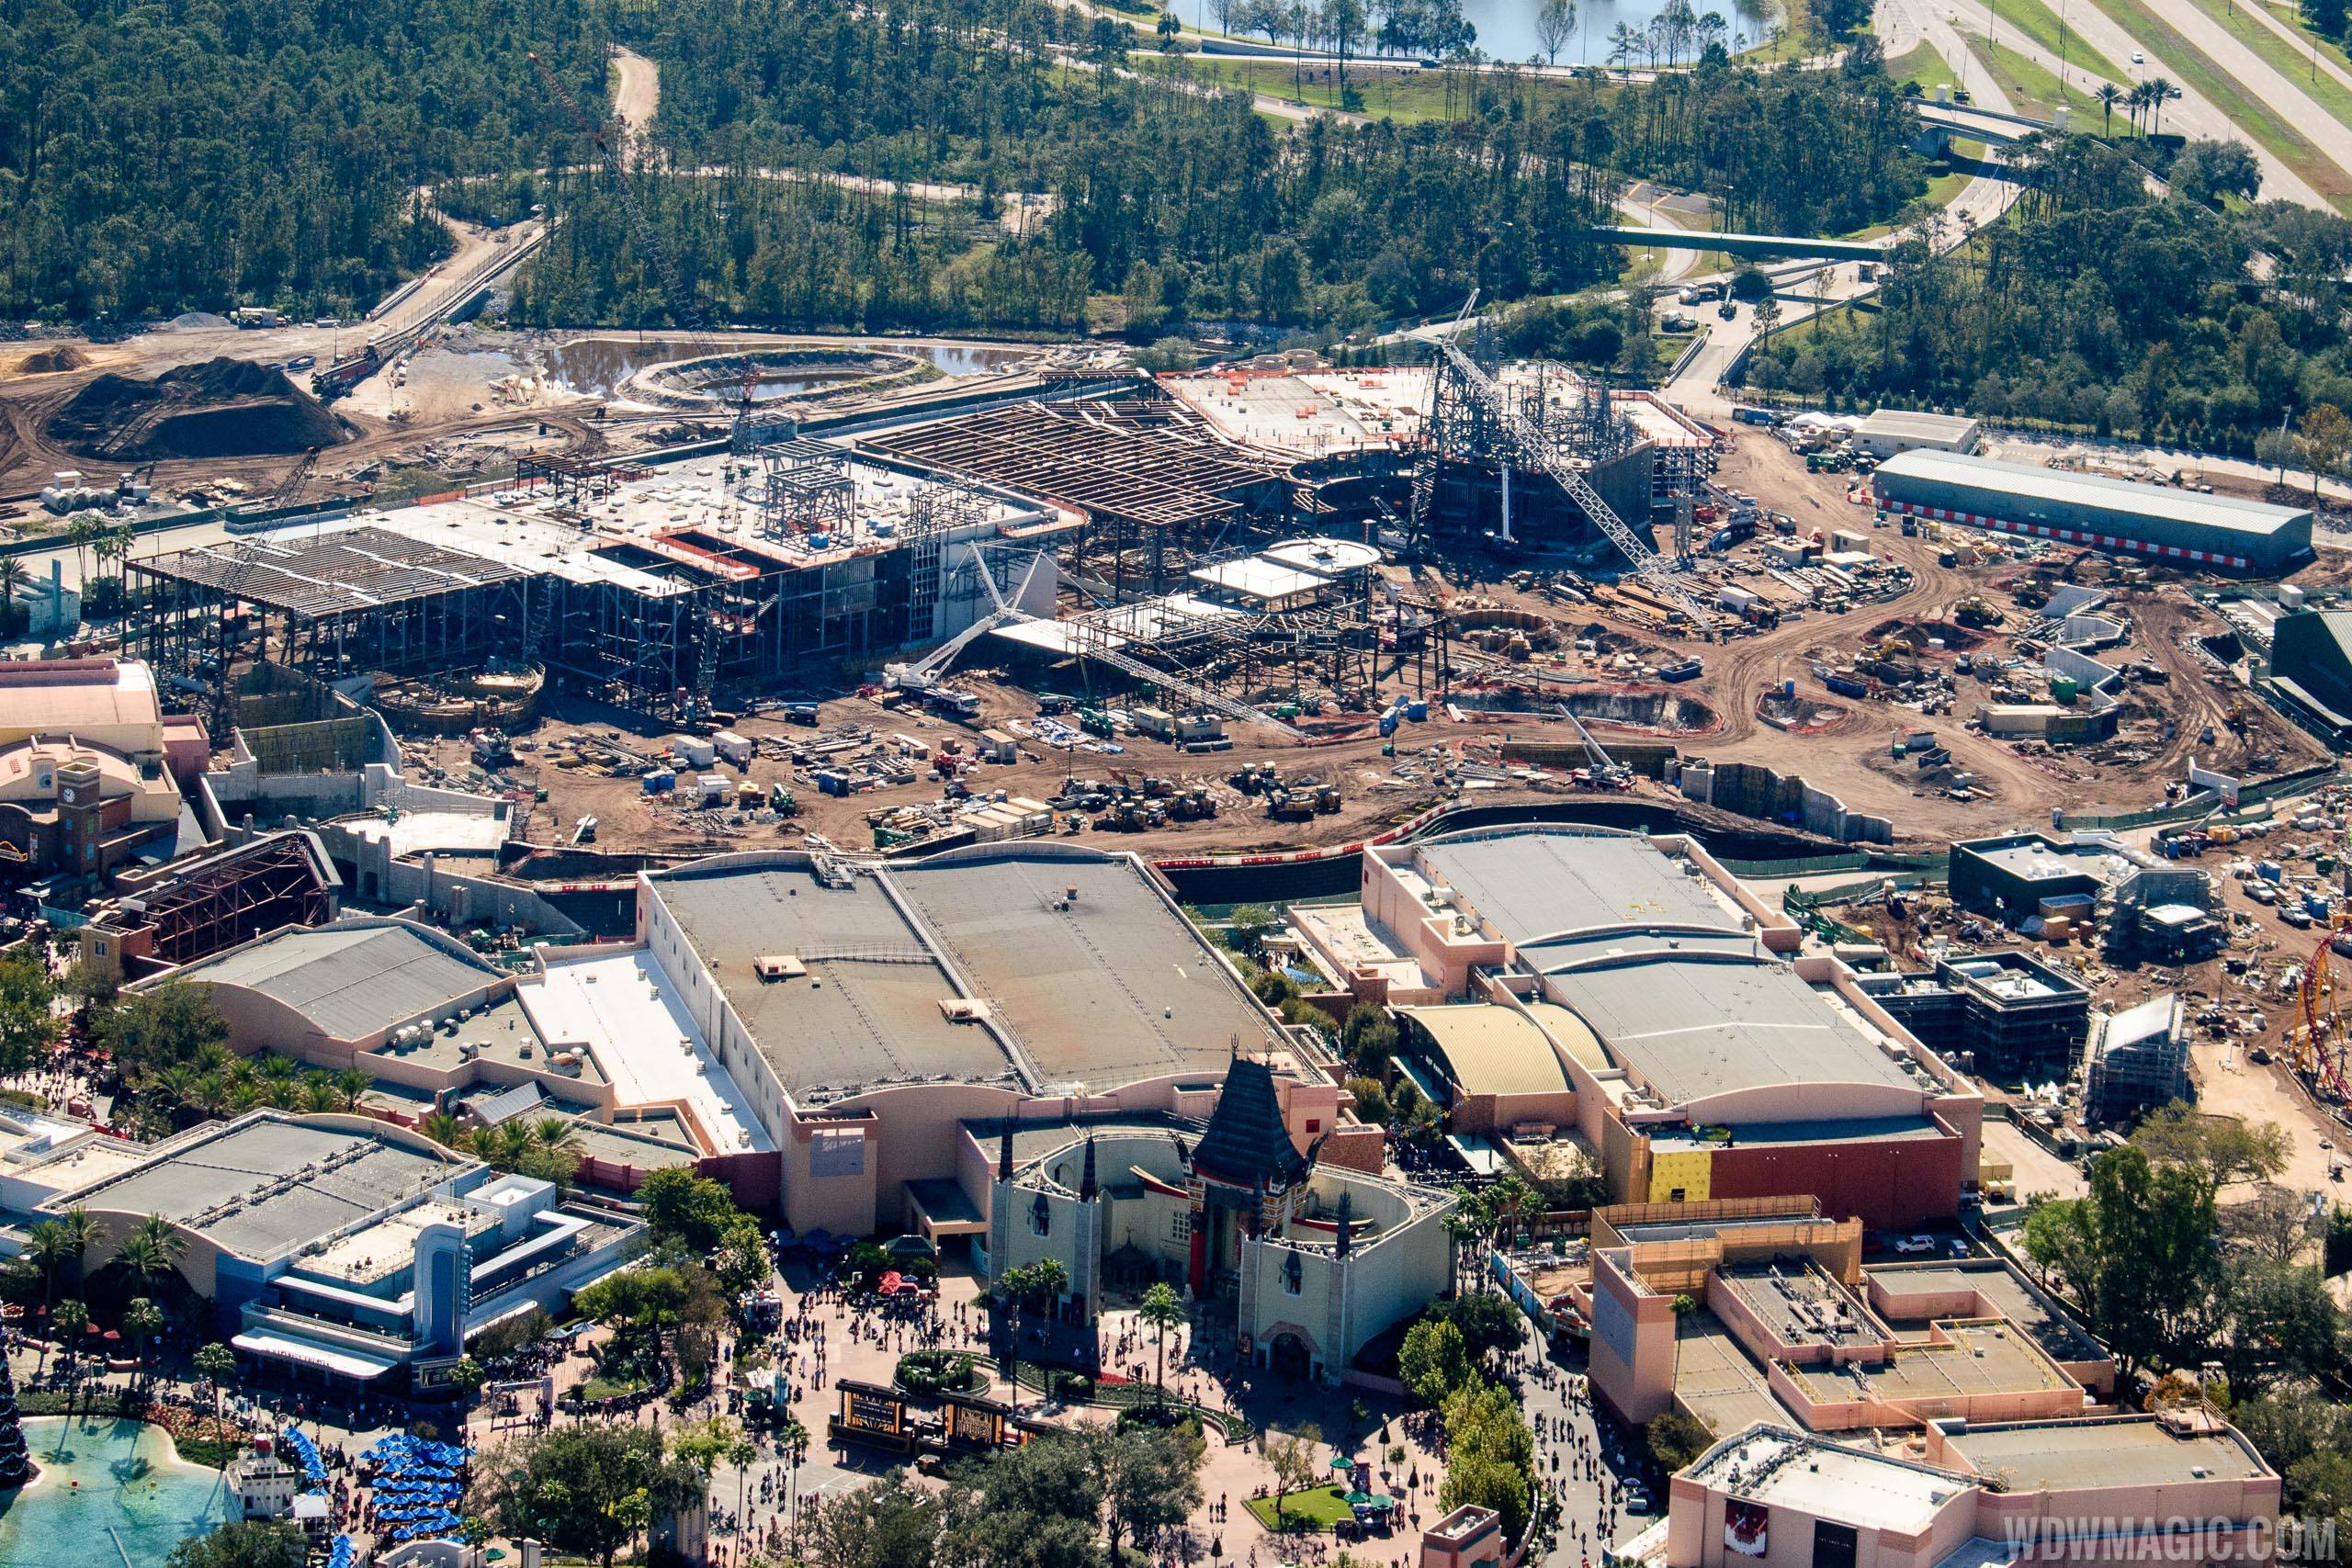 PHOTOS - Aerial pictures of Star Wars Galaxy's Edge under construction at Disney's Hollywood Studios